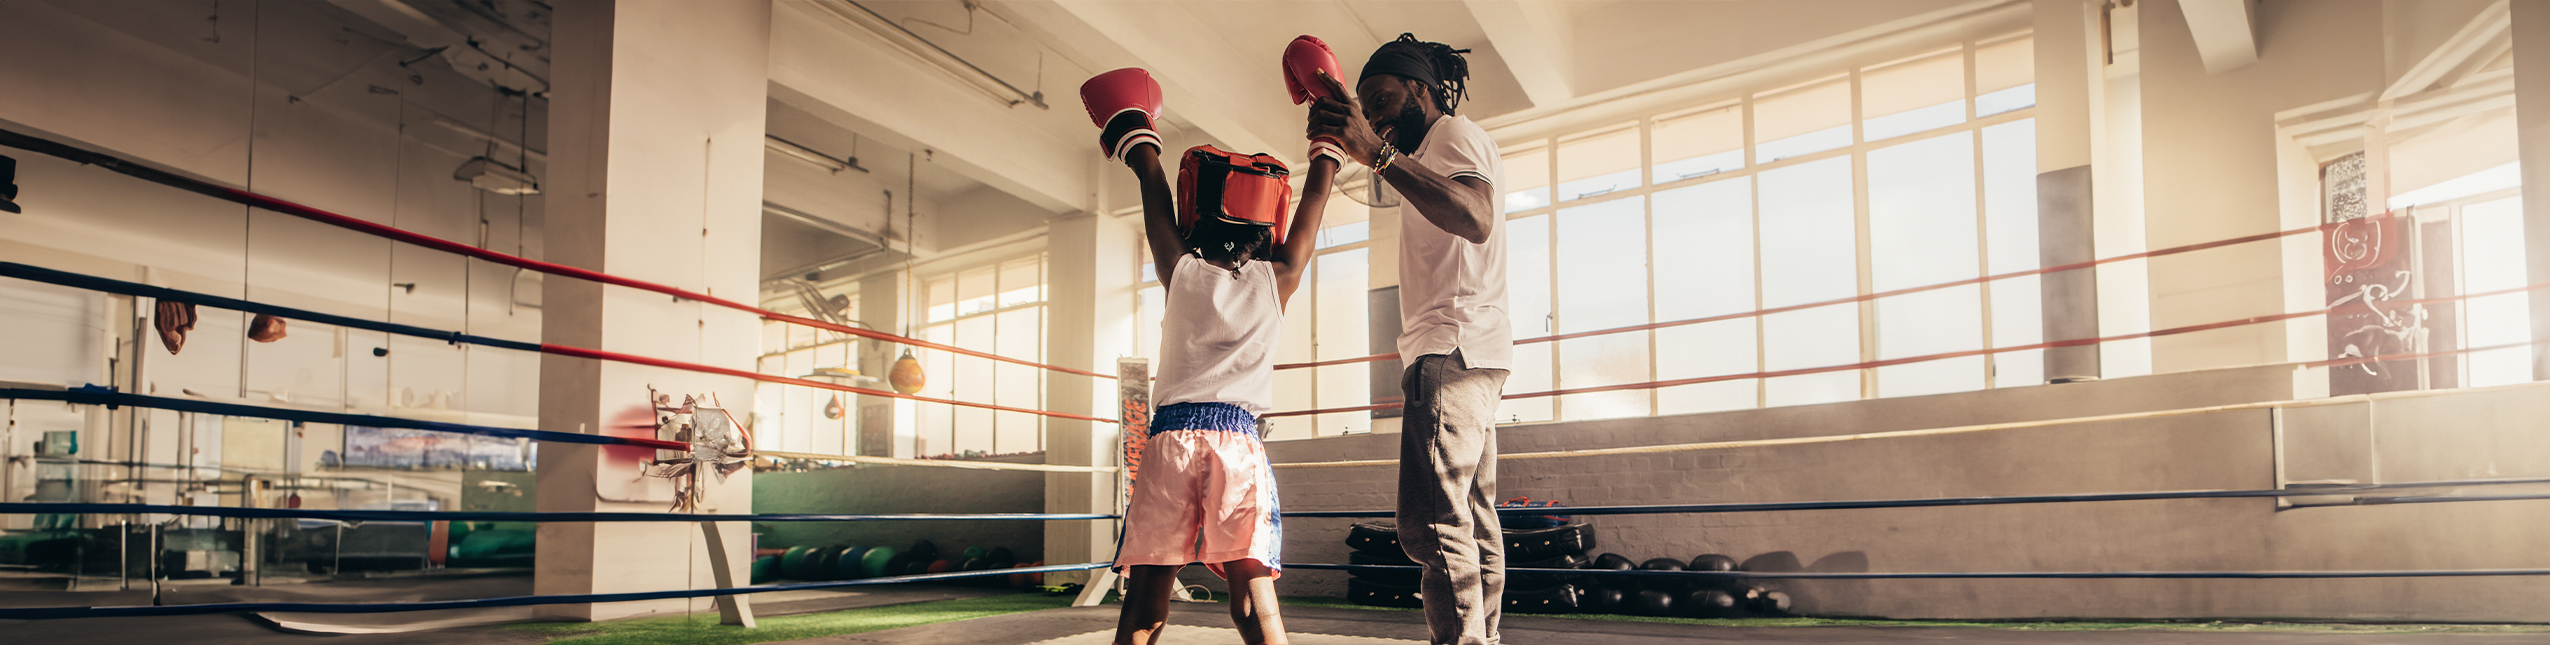 Boxing Coach holding up the hand of a boxing student